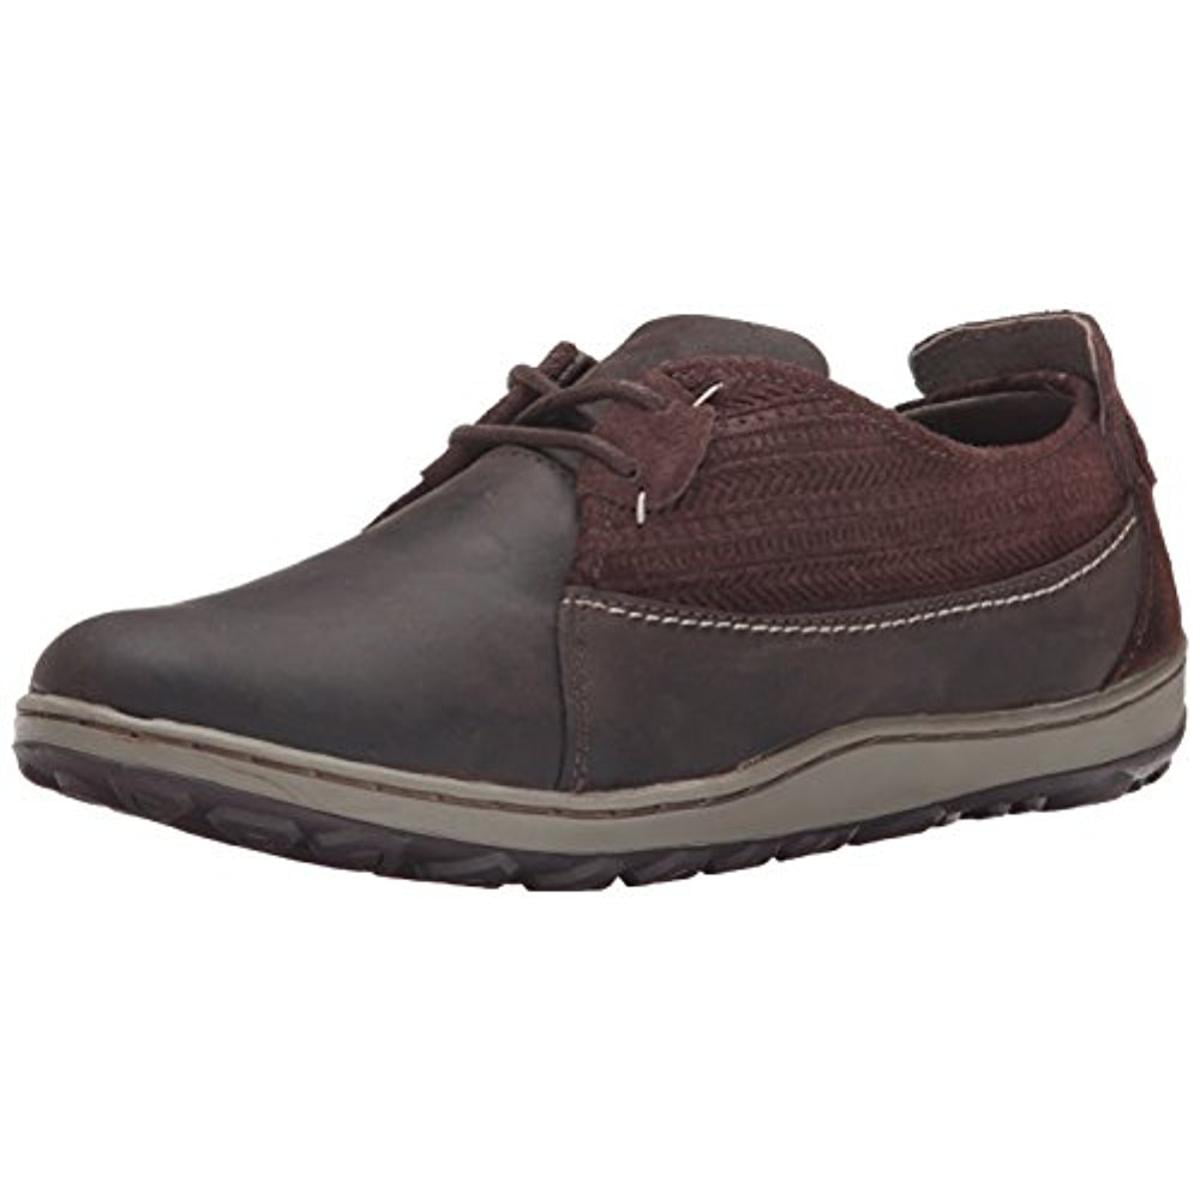 Merrell - Merrell Womens Ashland Tie Leather Suede Trim Casual Shoes ...